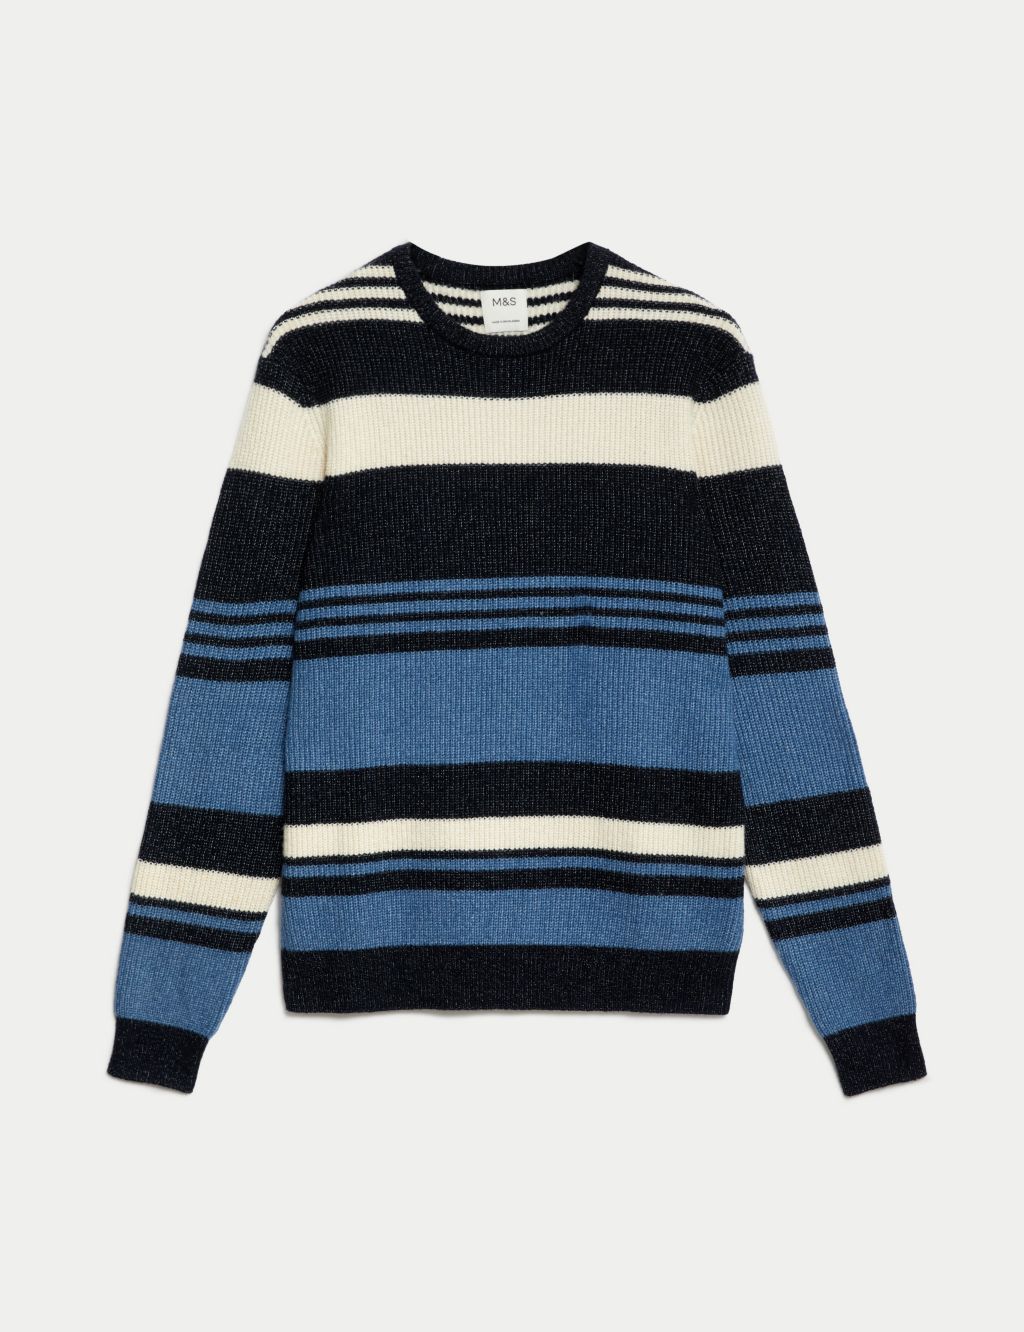 Supersoft Striped Chunky Crew Neck Jumper image 2